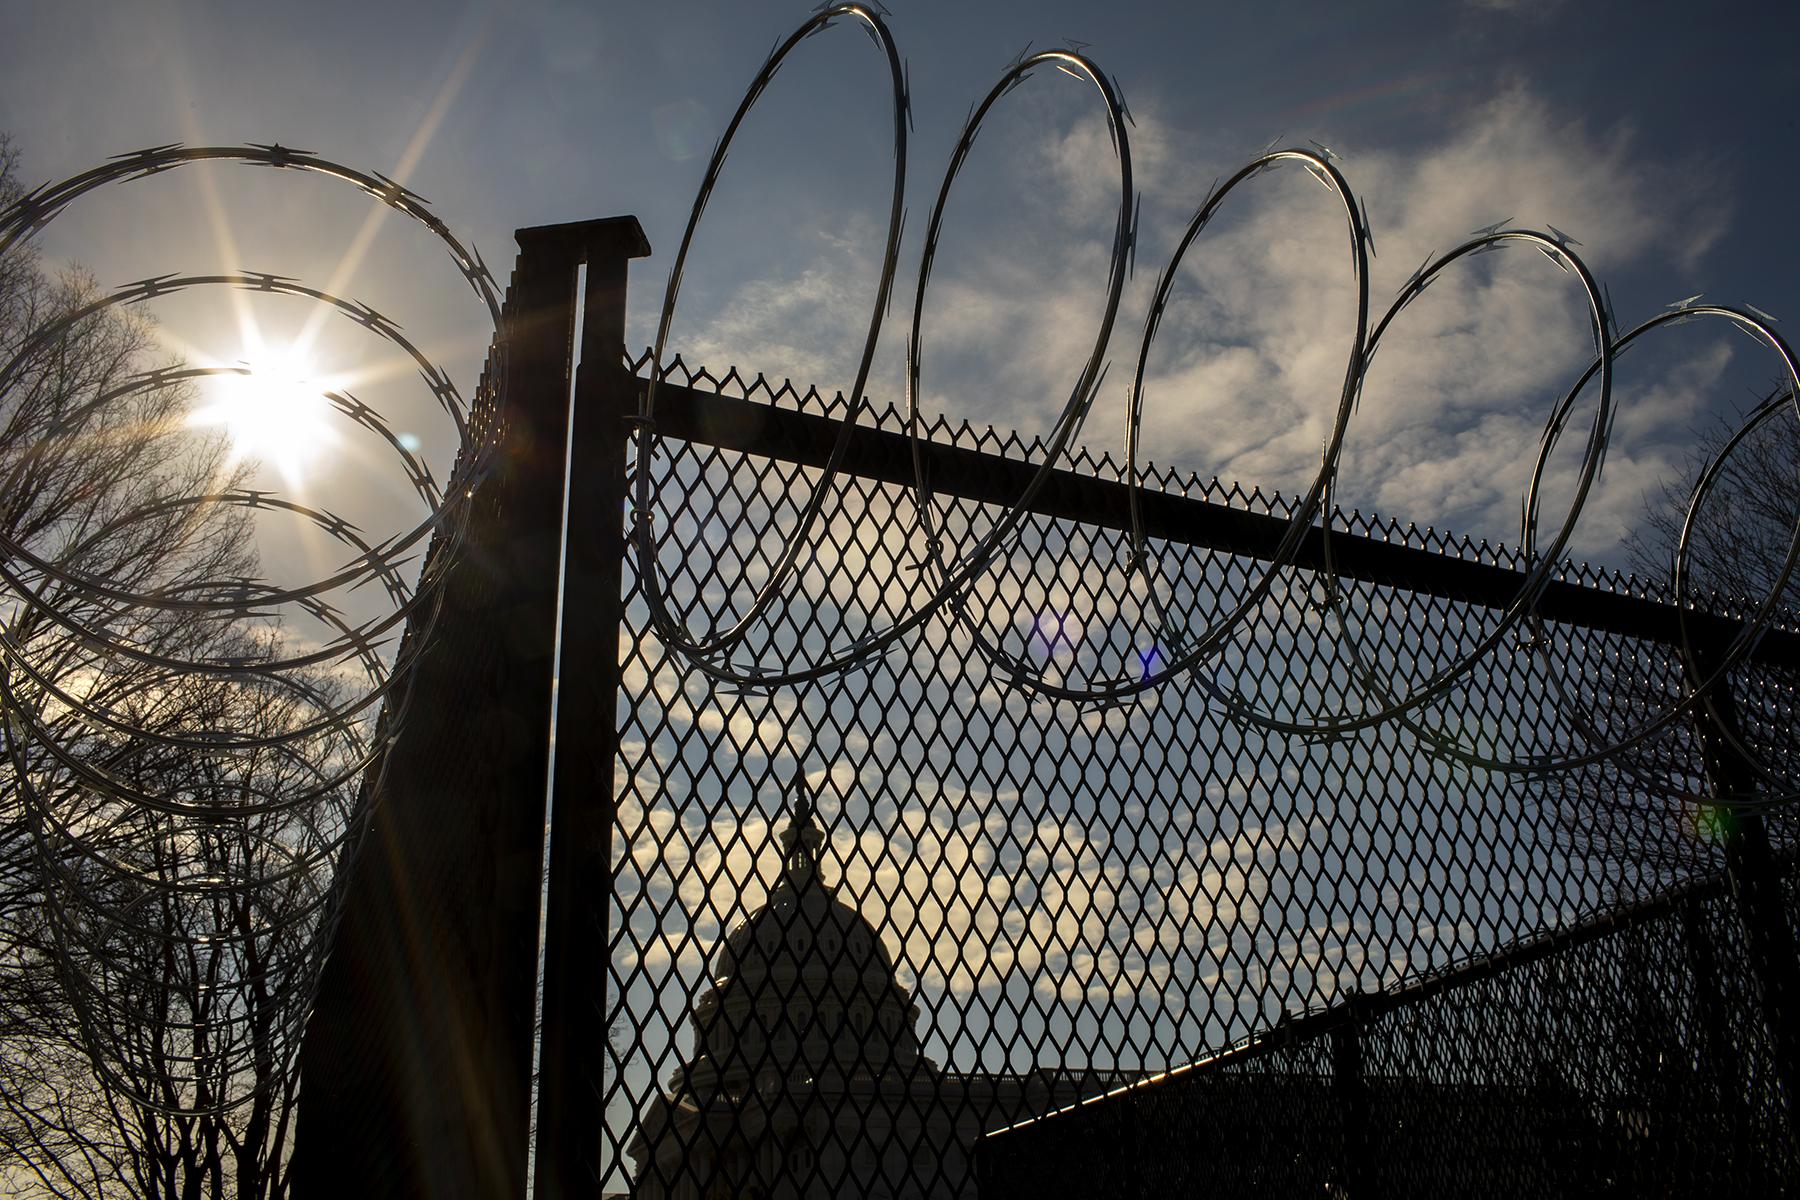 Protests, Pestilence & Politics - The fence with razor wire around the Capitol campus.